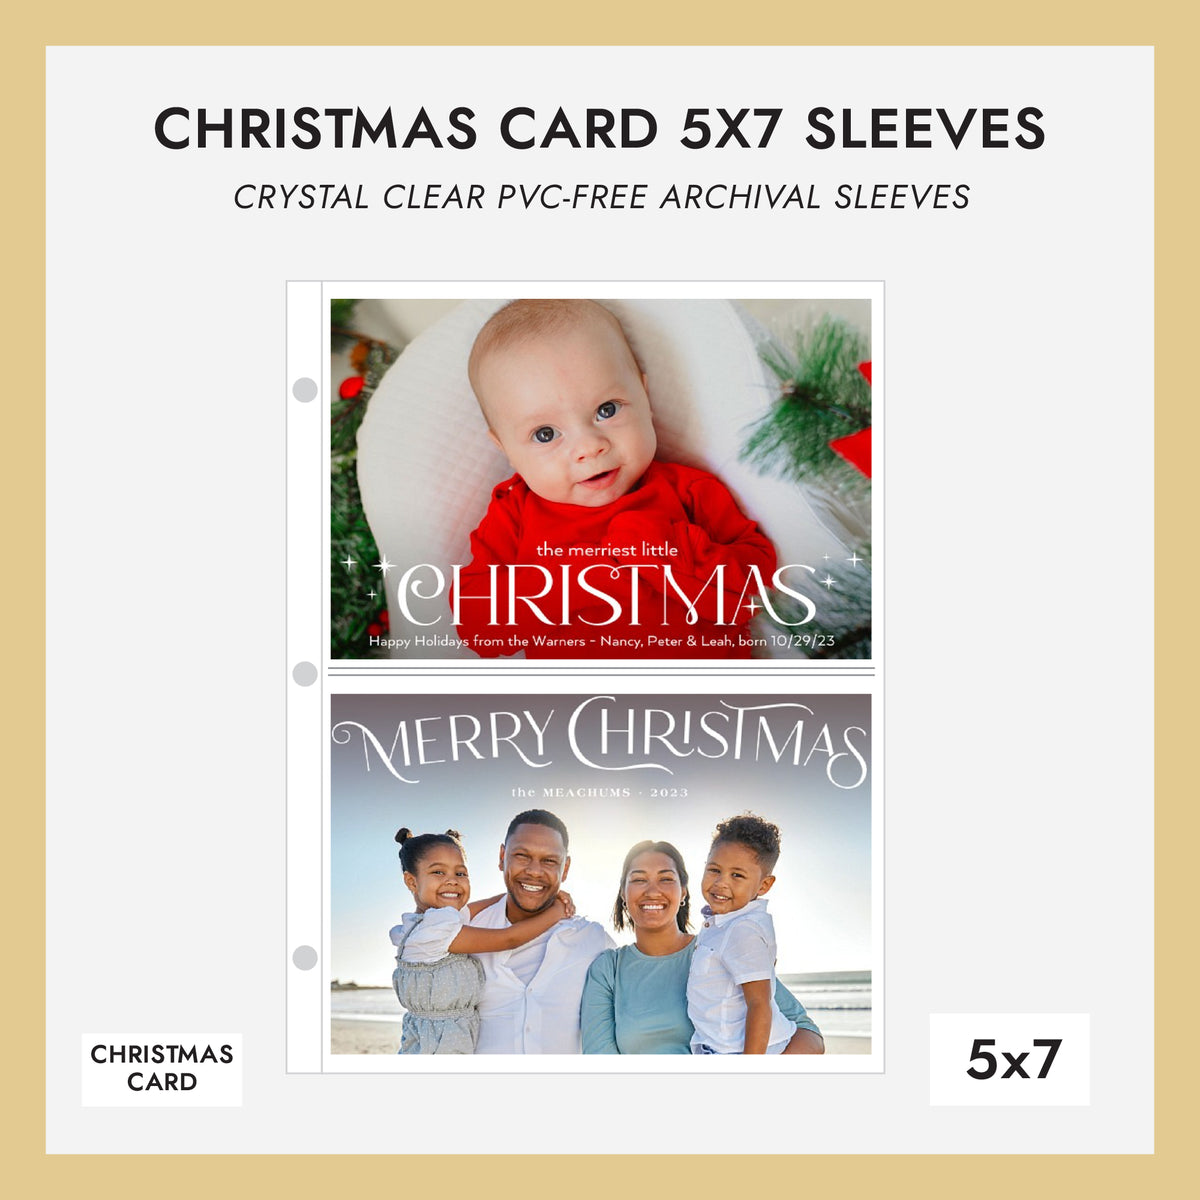 5x7 Christmas Card Album Sleeves (for 5x7 Cards) Set Of 10